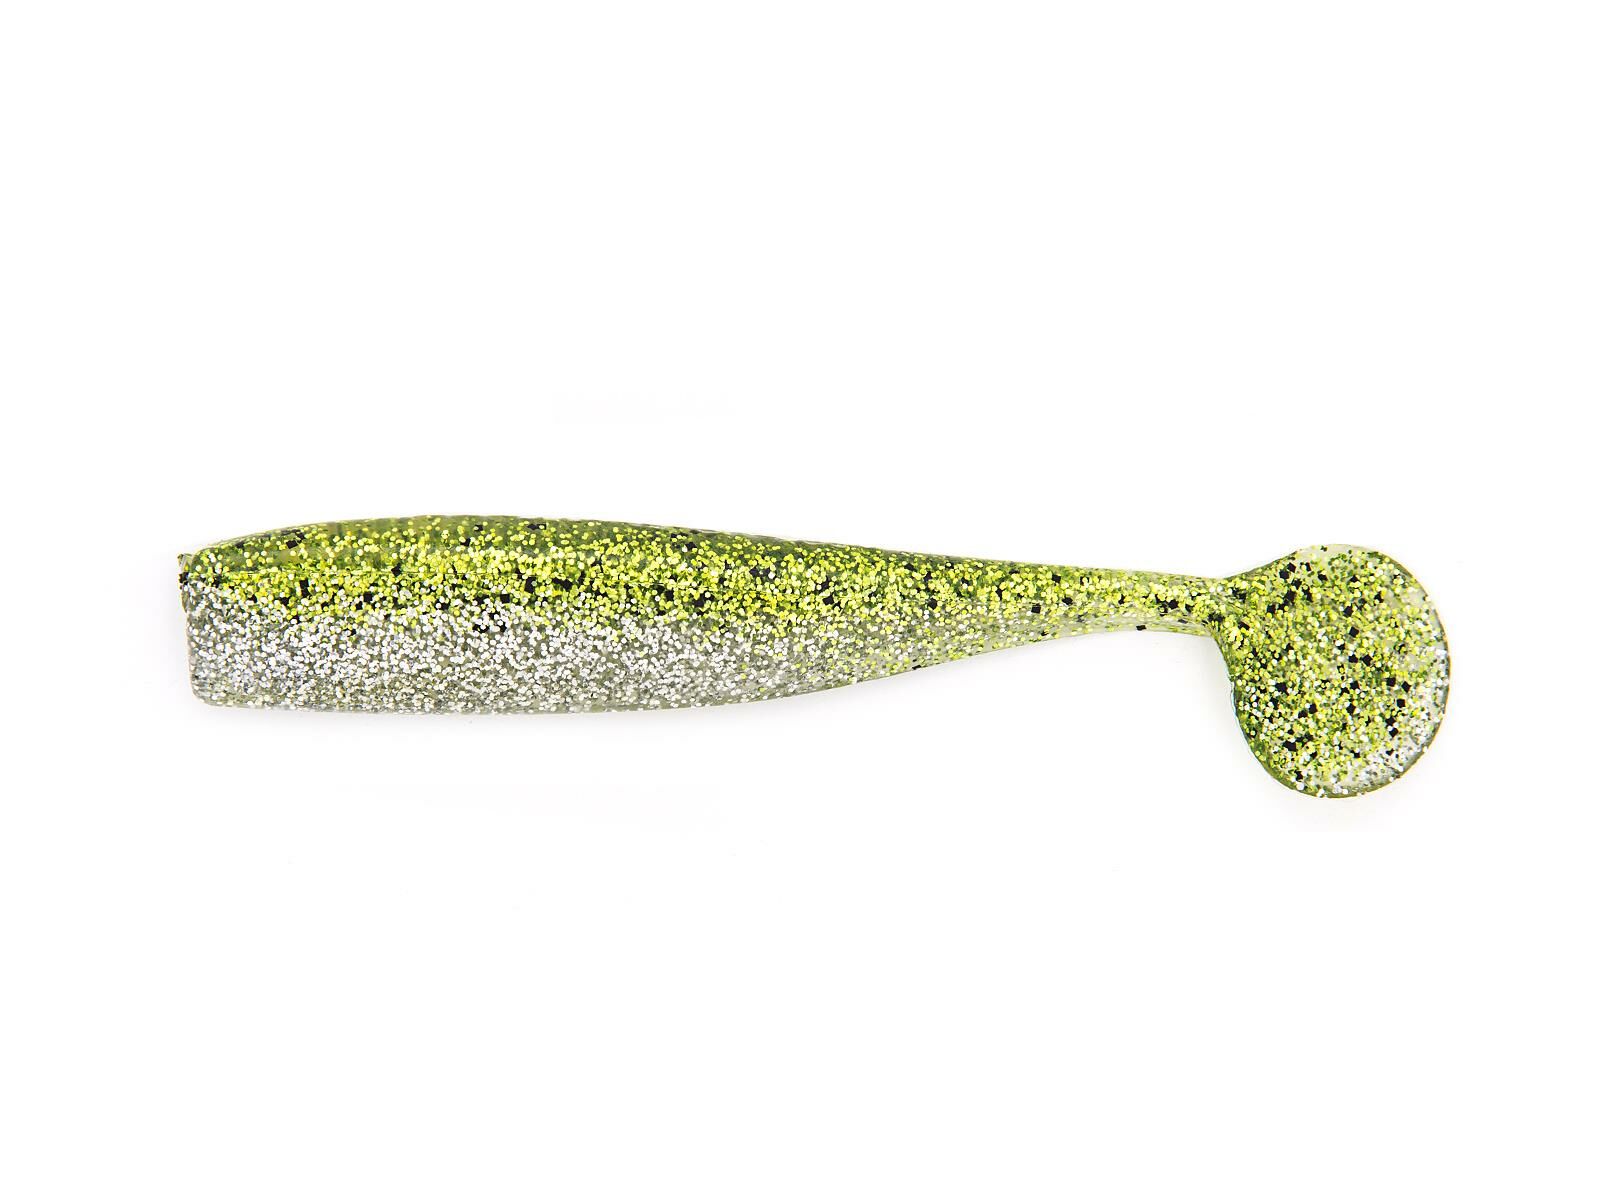 4.5" Shaker - Chartreuse Ice